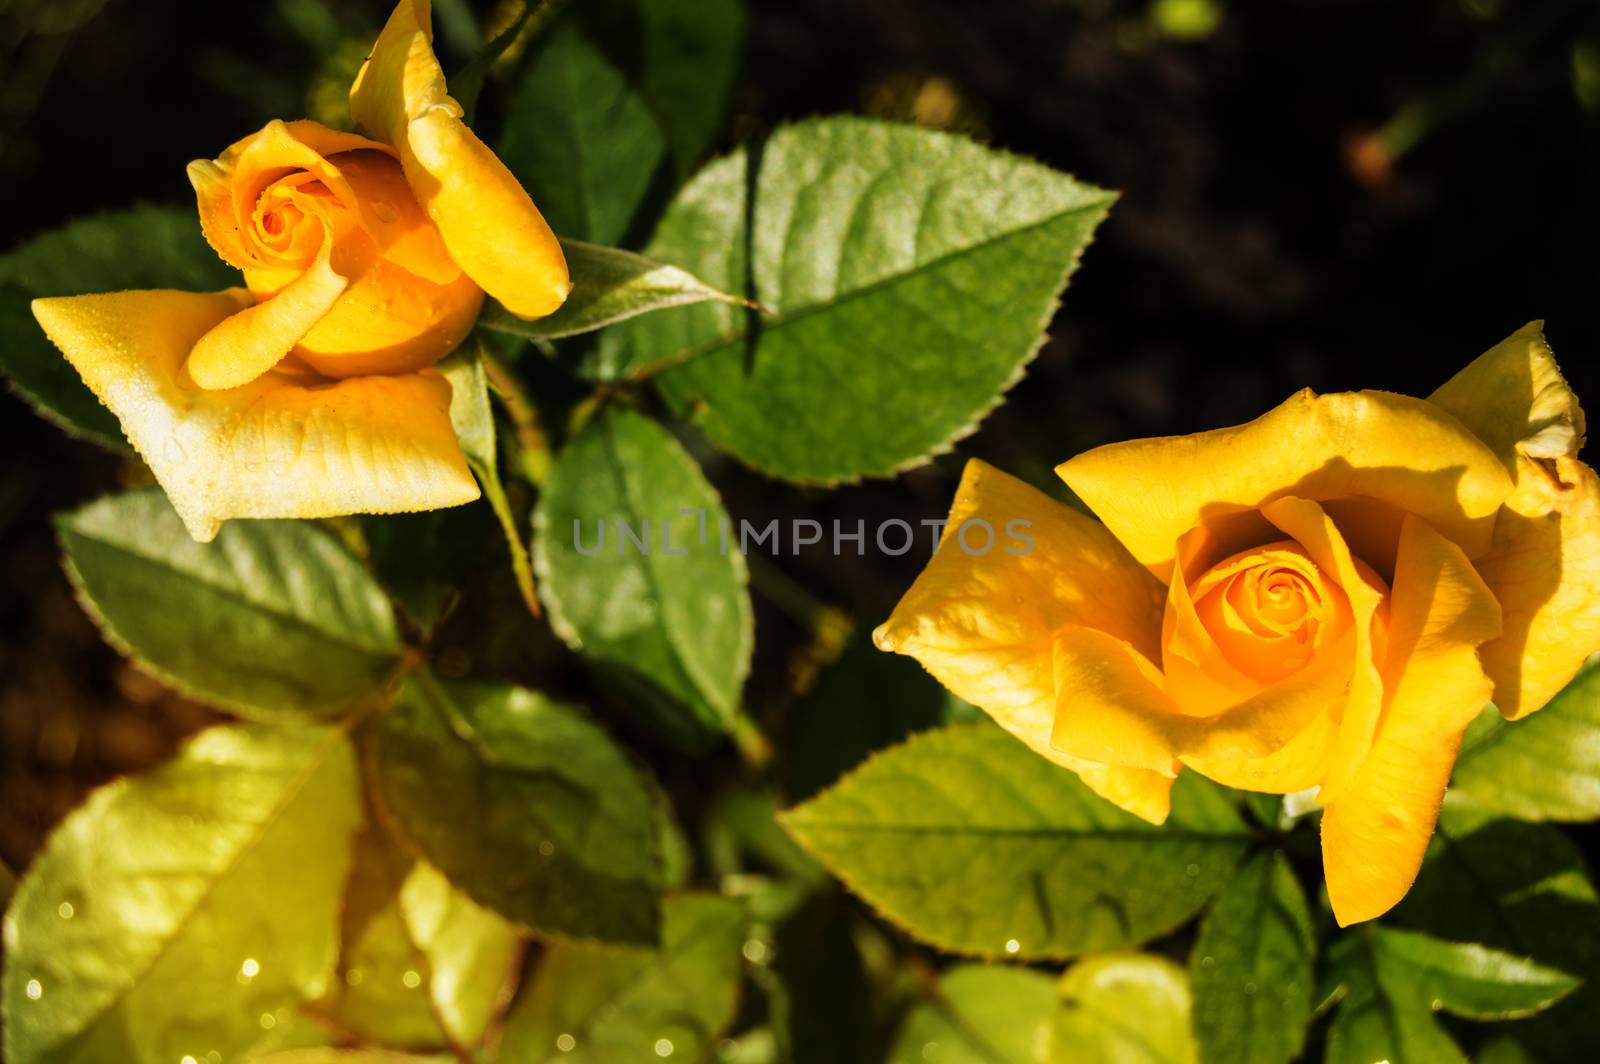 Two beautiful yellow roses blooming in a garden background of green leaves and stems, the concept of postcards by claire_lucia